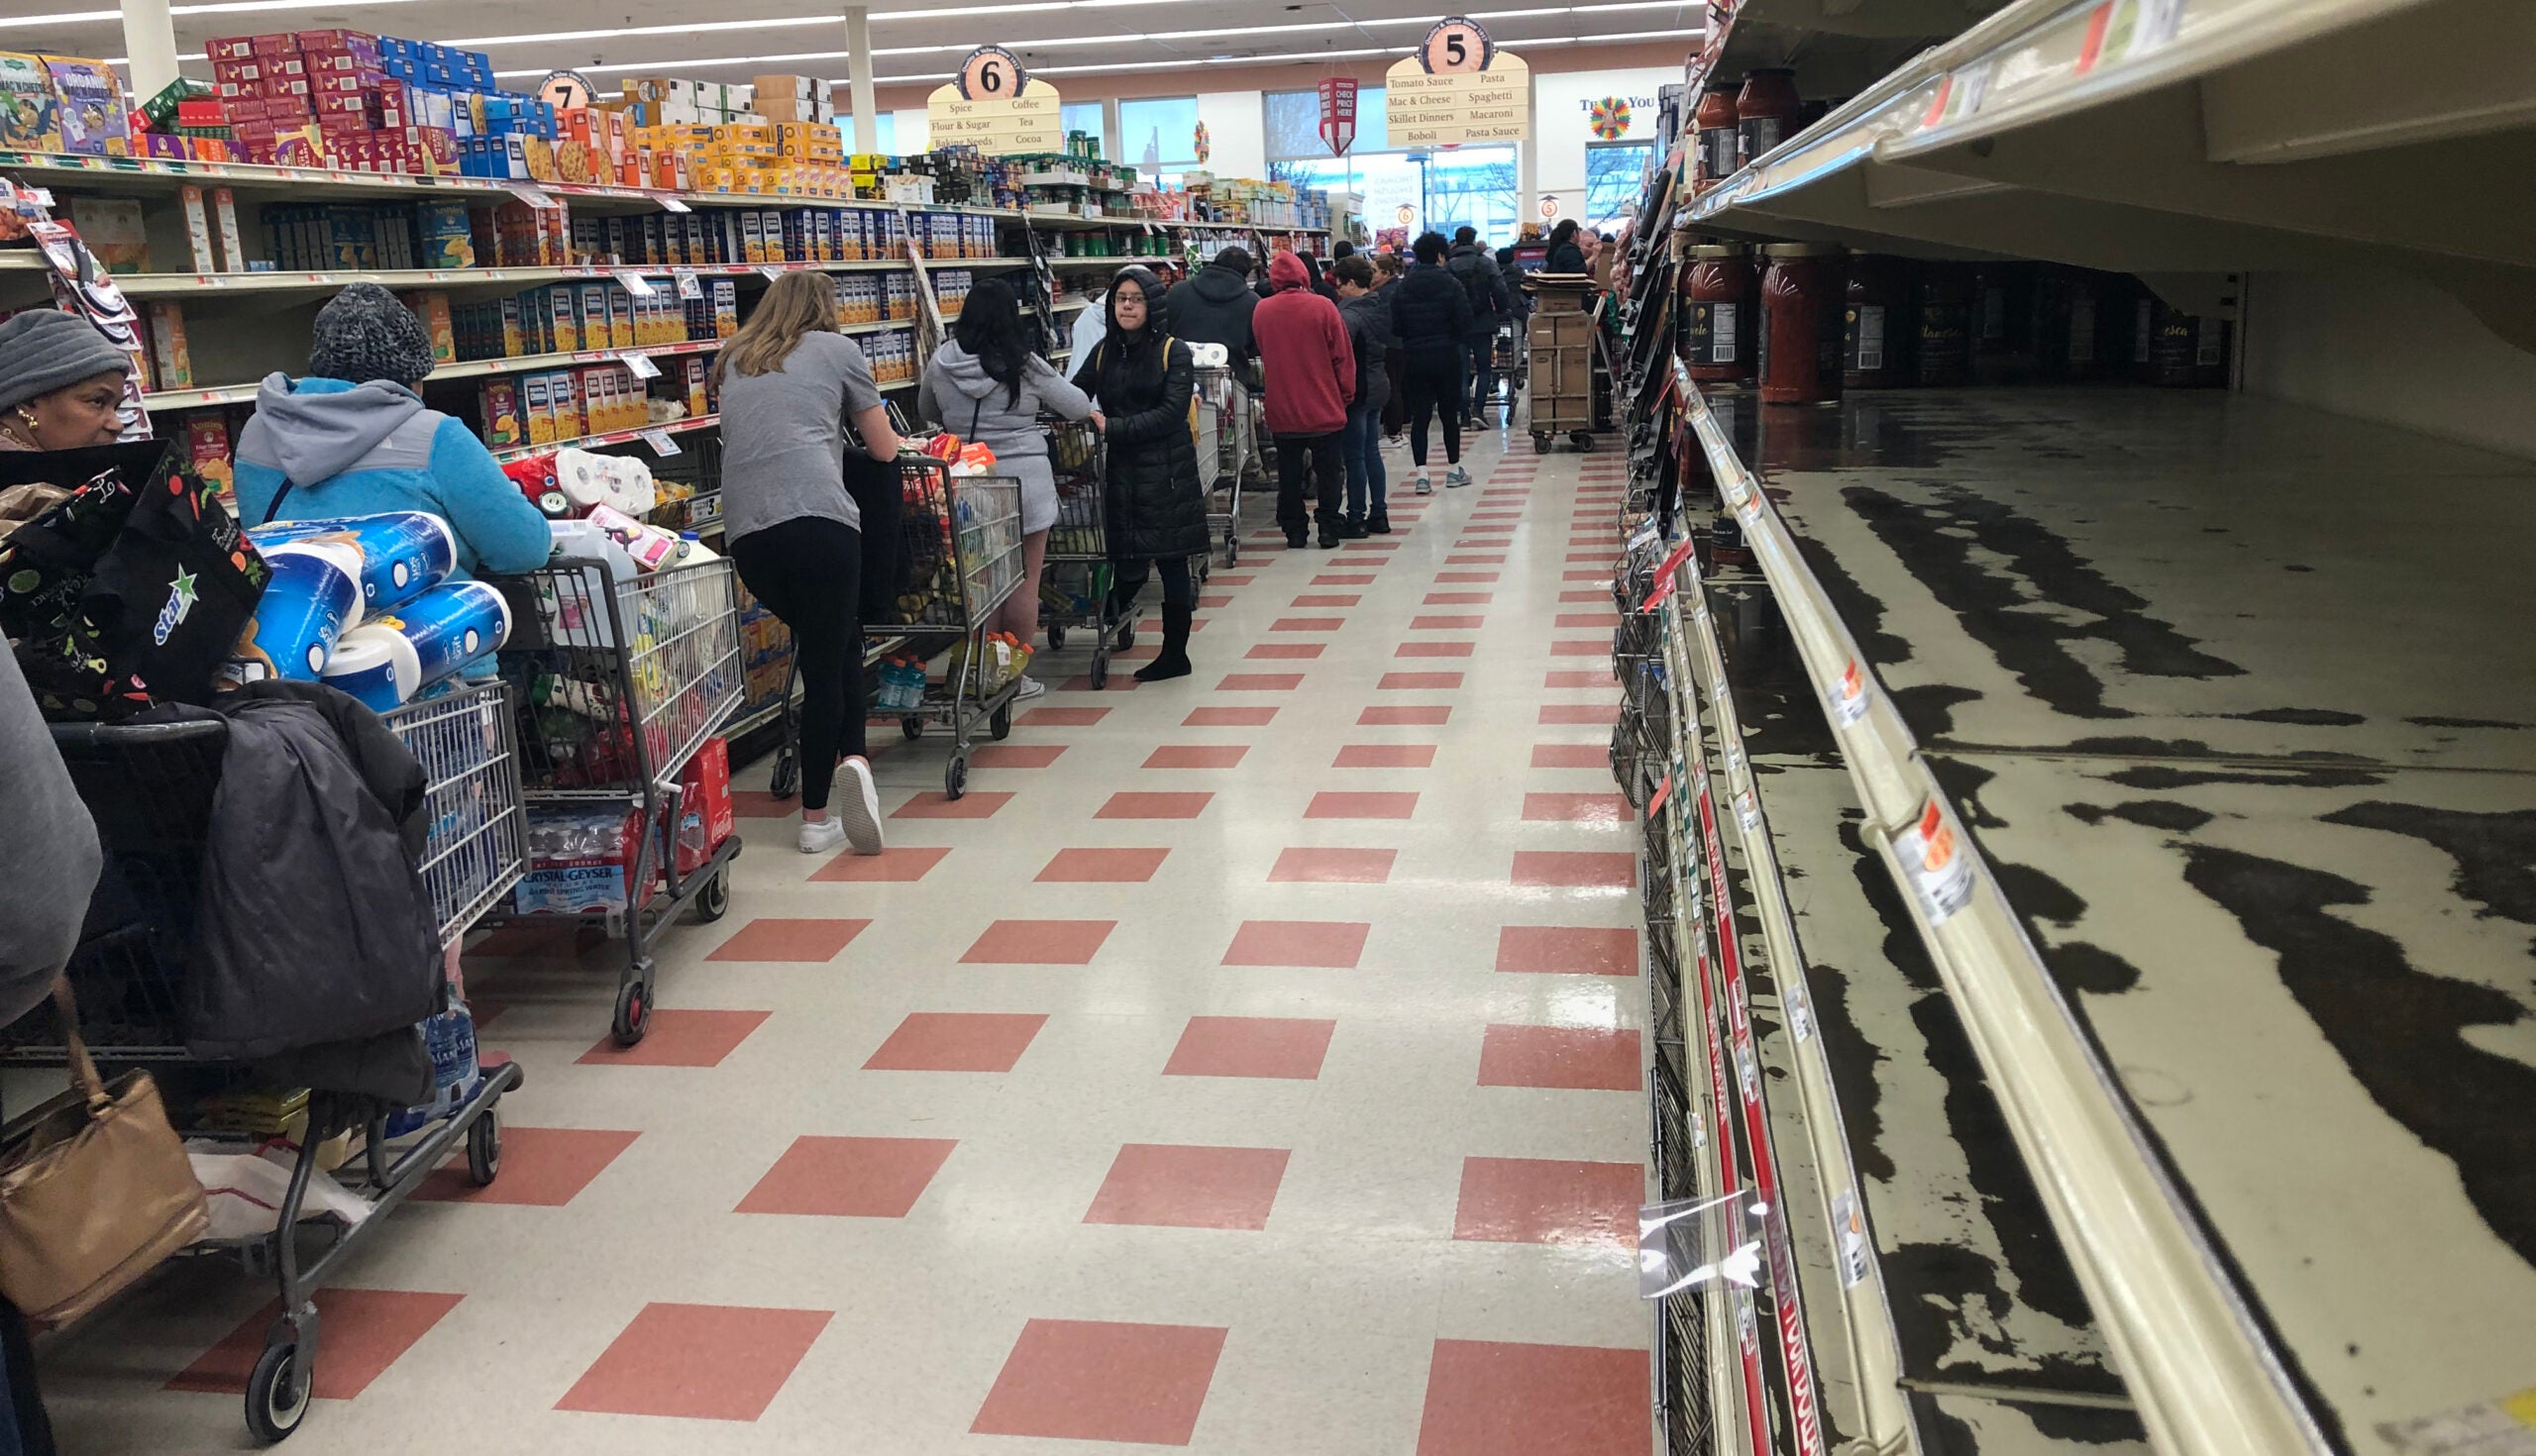 Charlie Baker urges grocery shoppers against hoarding food amid